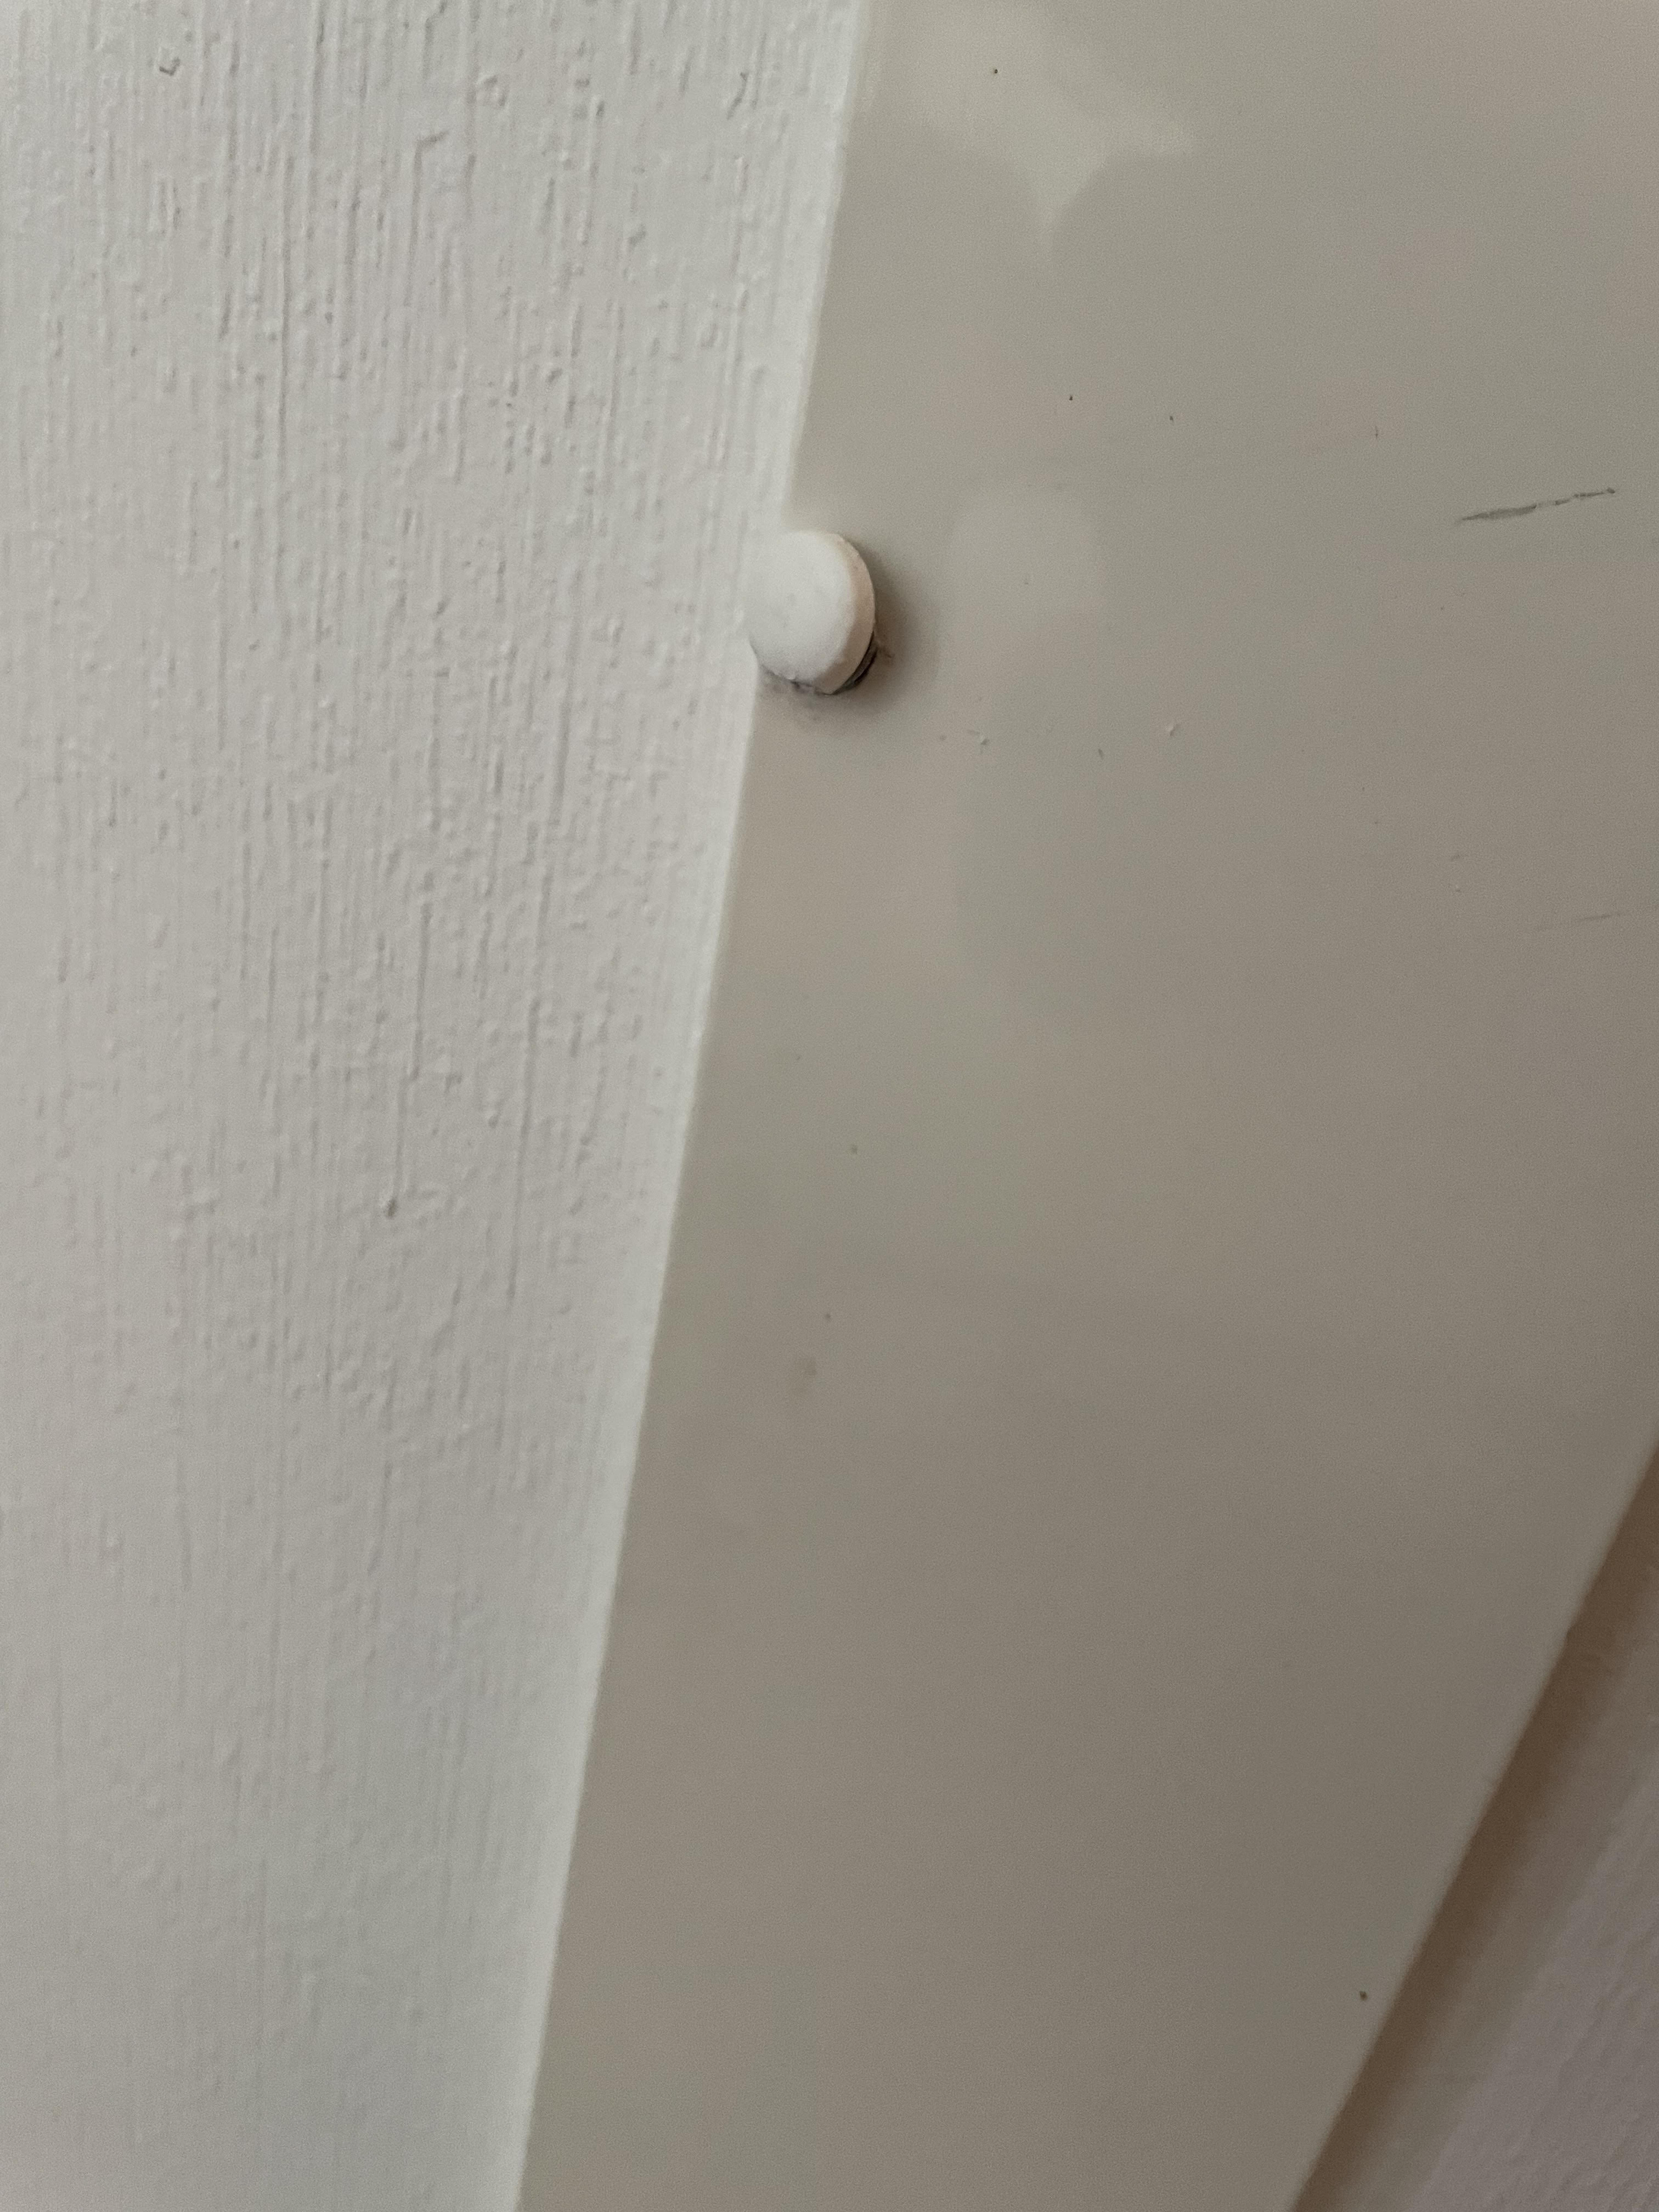 button on wall